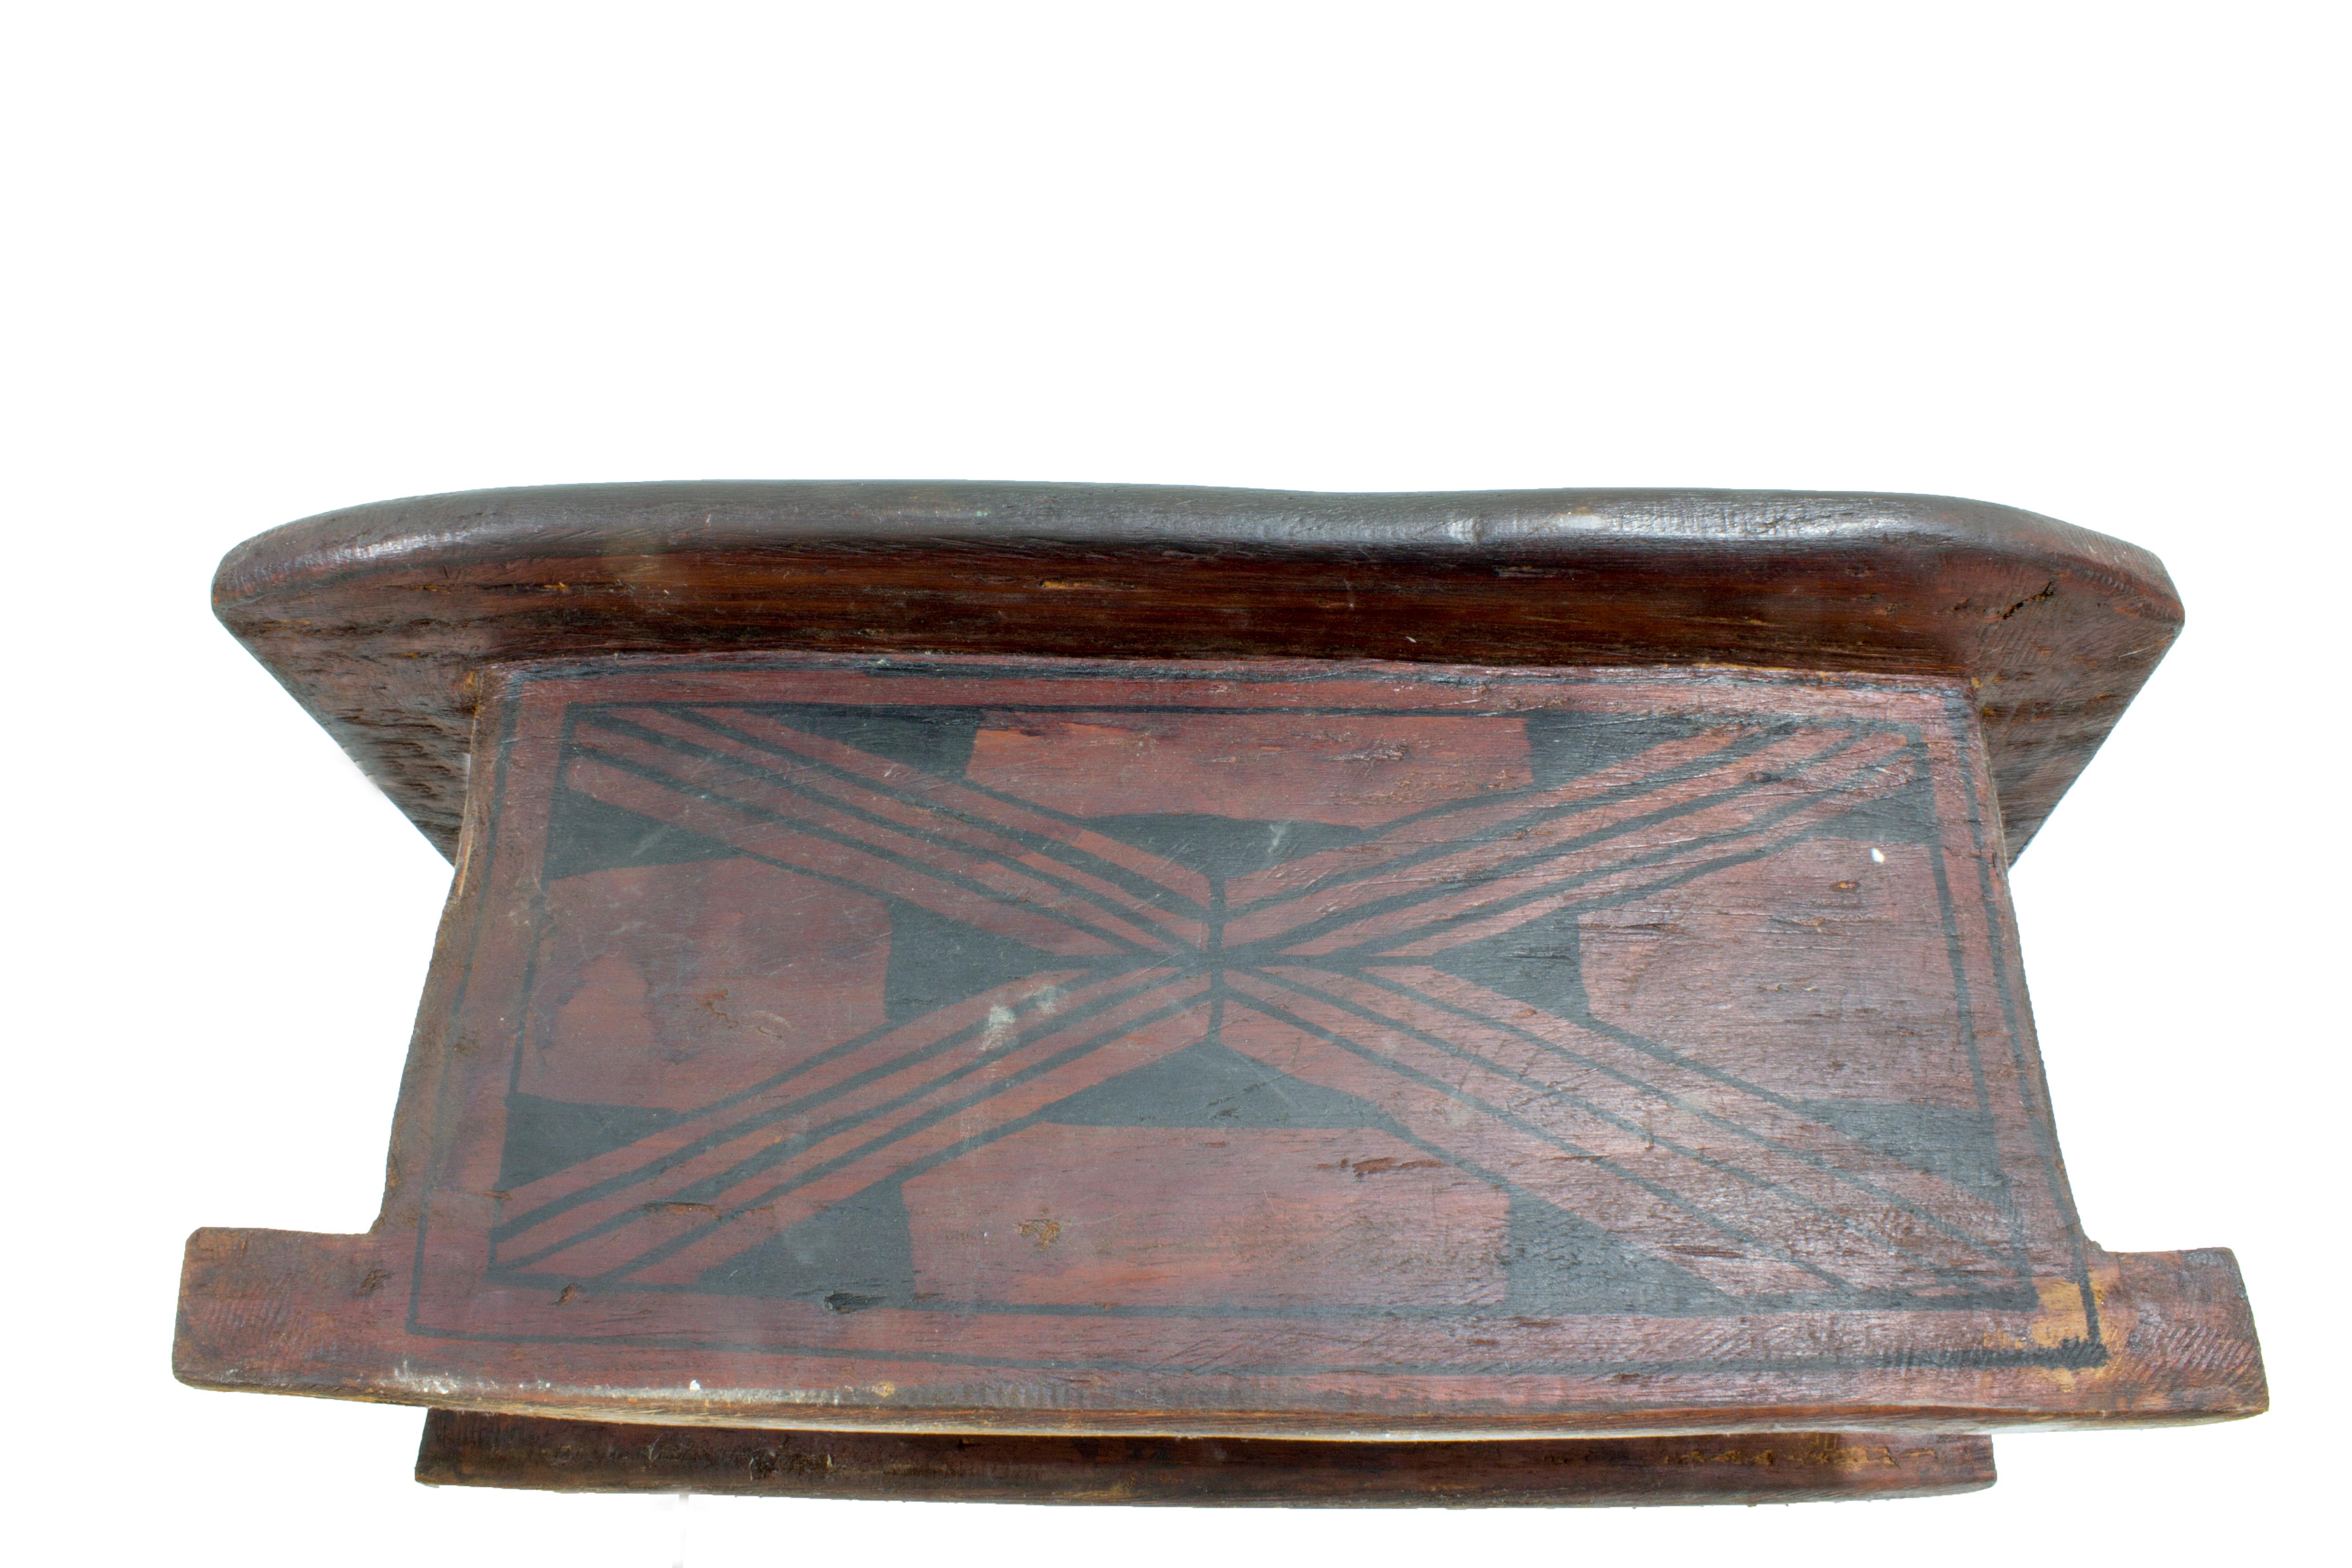 This Brazilian Pajé stool was made by the Xingu Waujá tribe. Stools combine functionality and beauty; they are wood-carved after animals found in Brazilian forests, or geometric-shaped and decorated with notches or natural pigment designs. More than